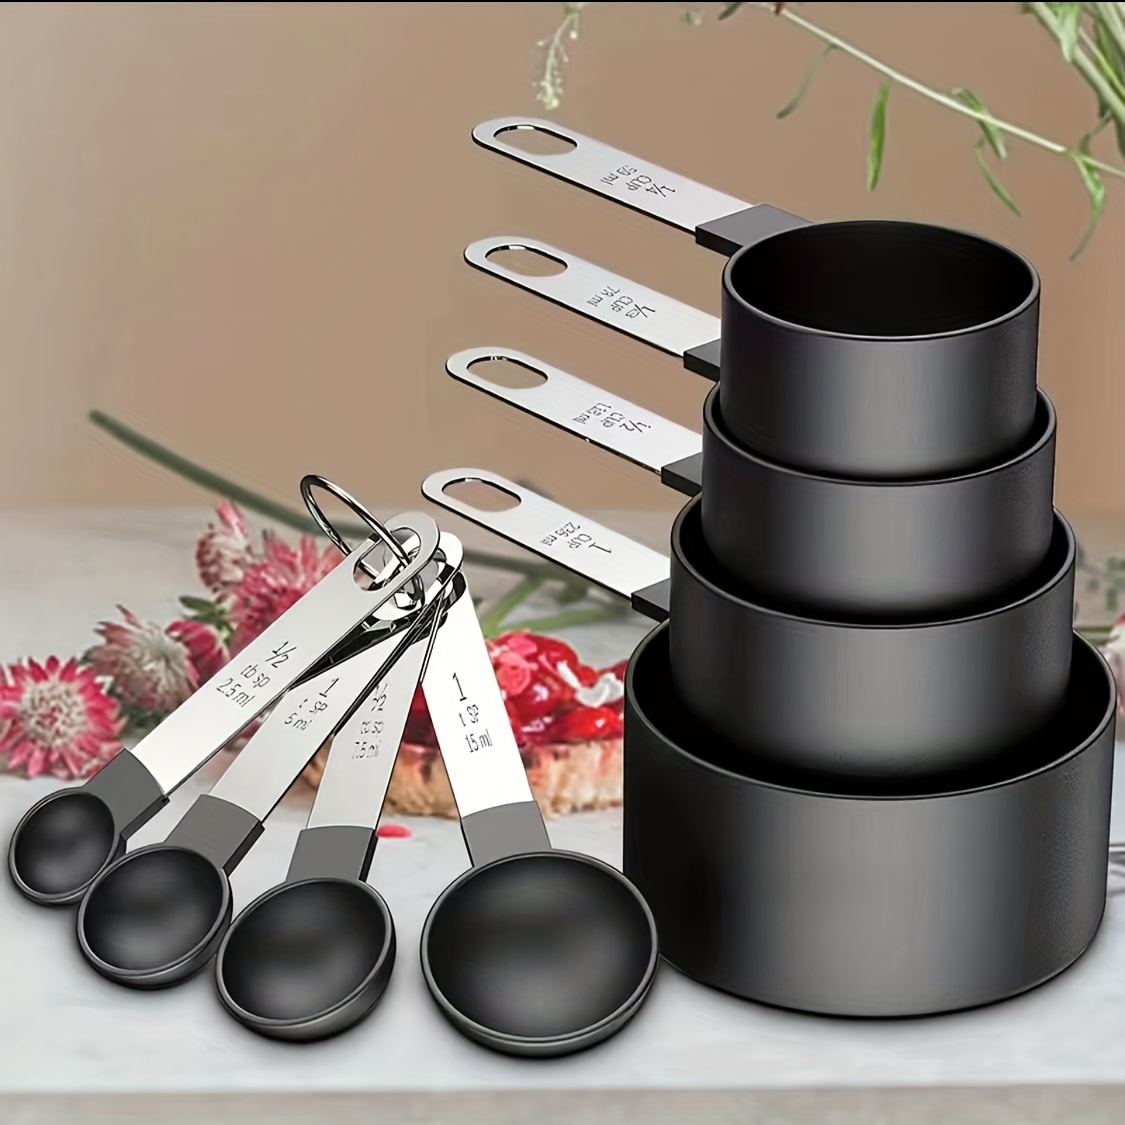 Cook with Color 8-Piece Measuring Cups and Measuring Spoon Set - Stainless Steel Liquid Measuring Cup Set or Dry Measuring Cups Set (Black)